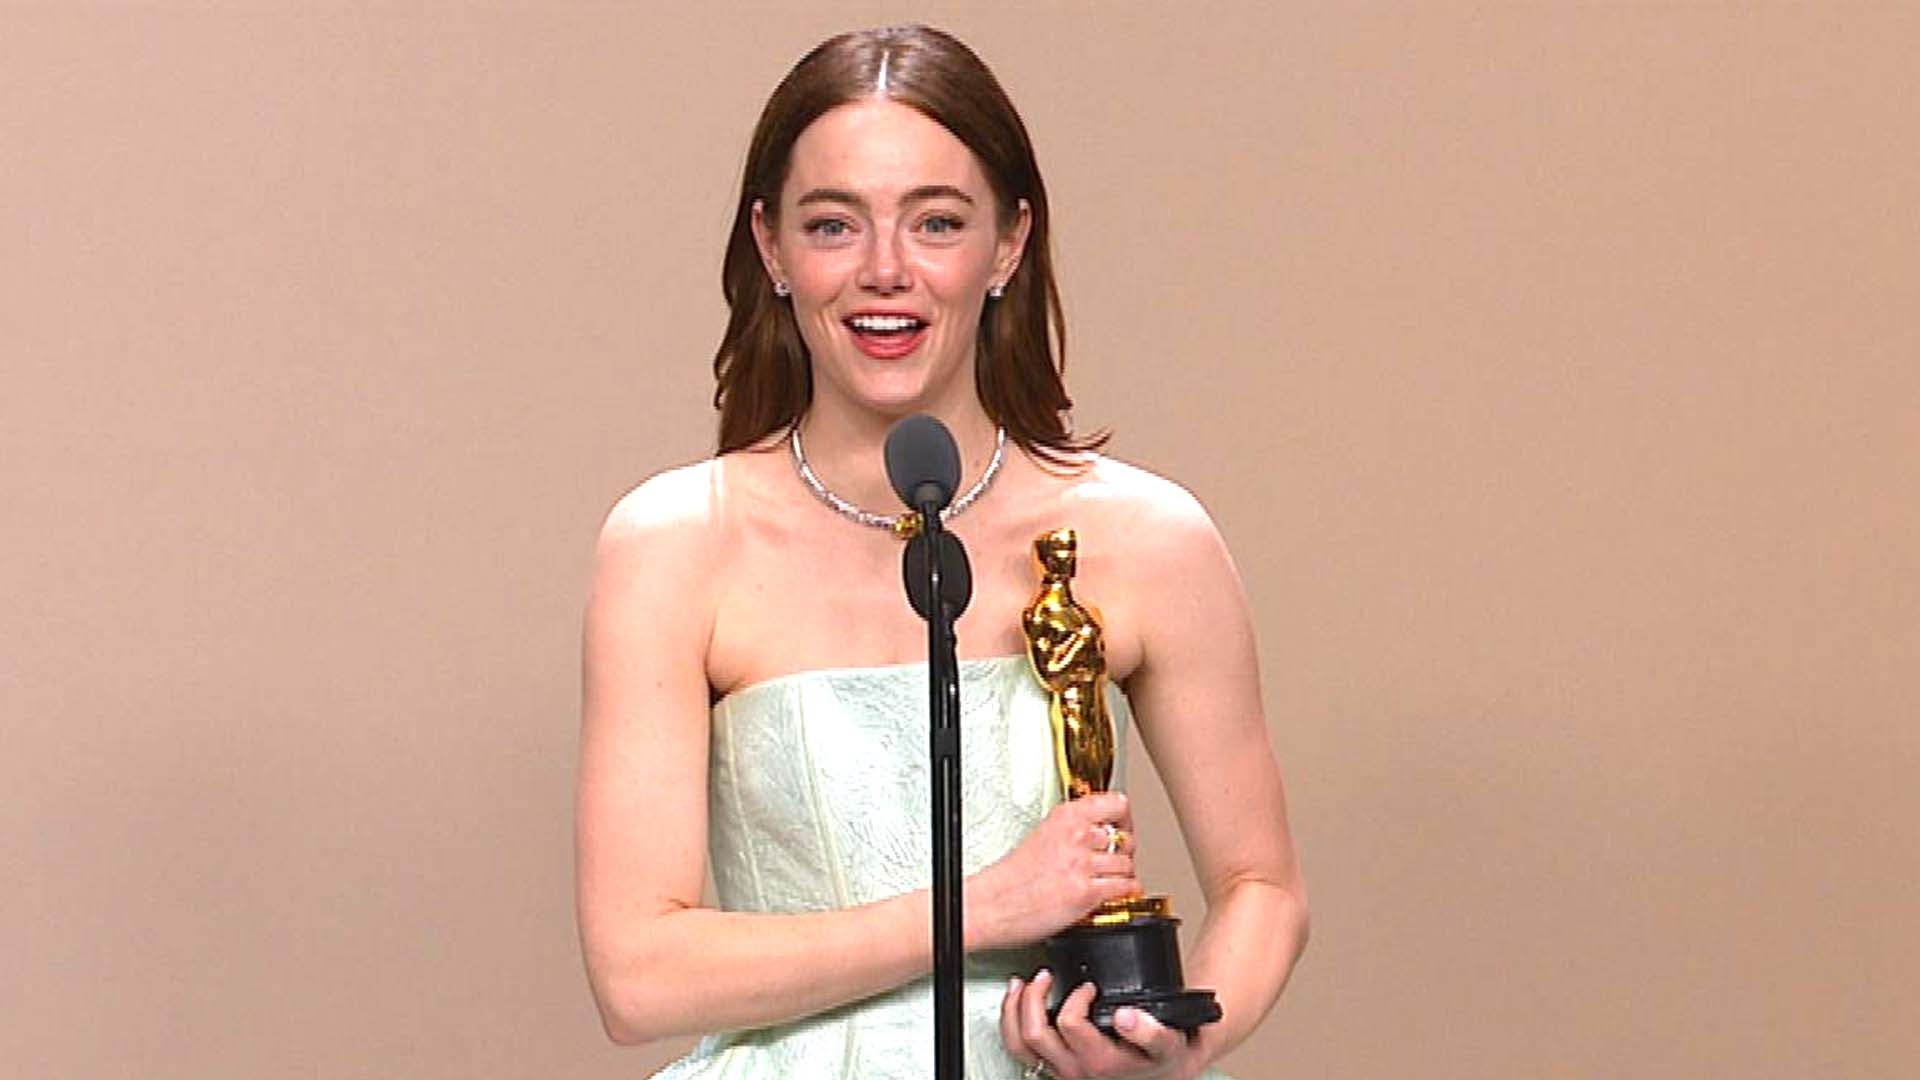 Oscars Press Room: Emma Stone, Actress in a Leading Role